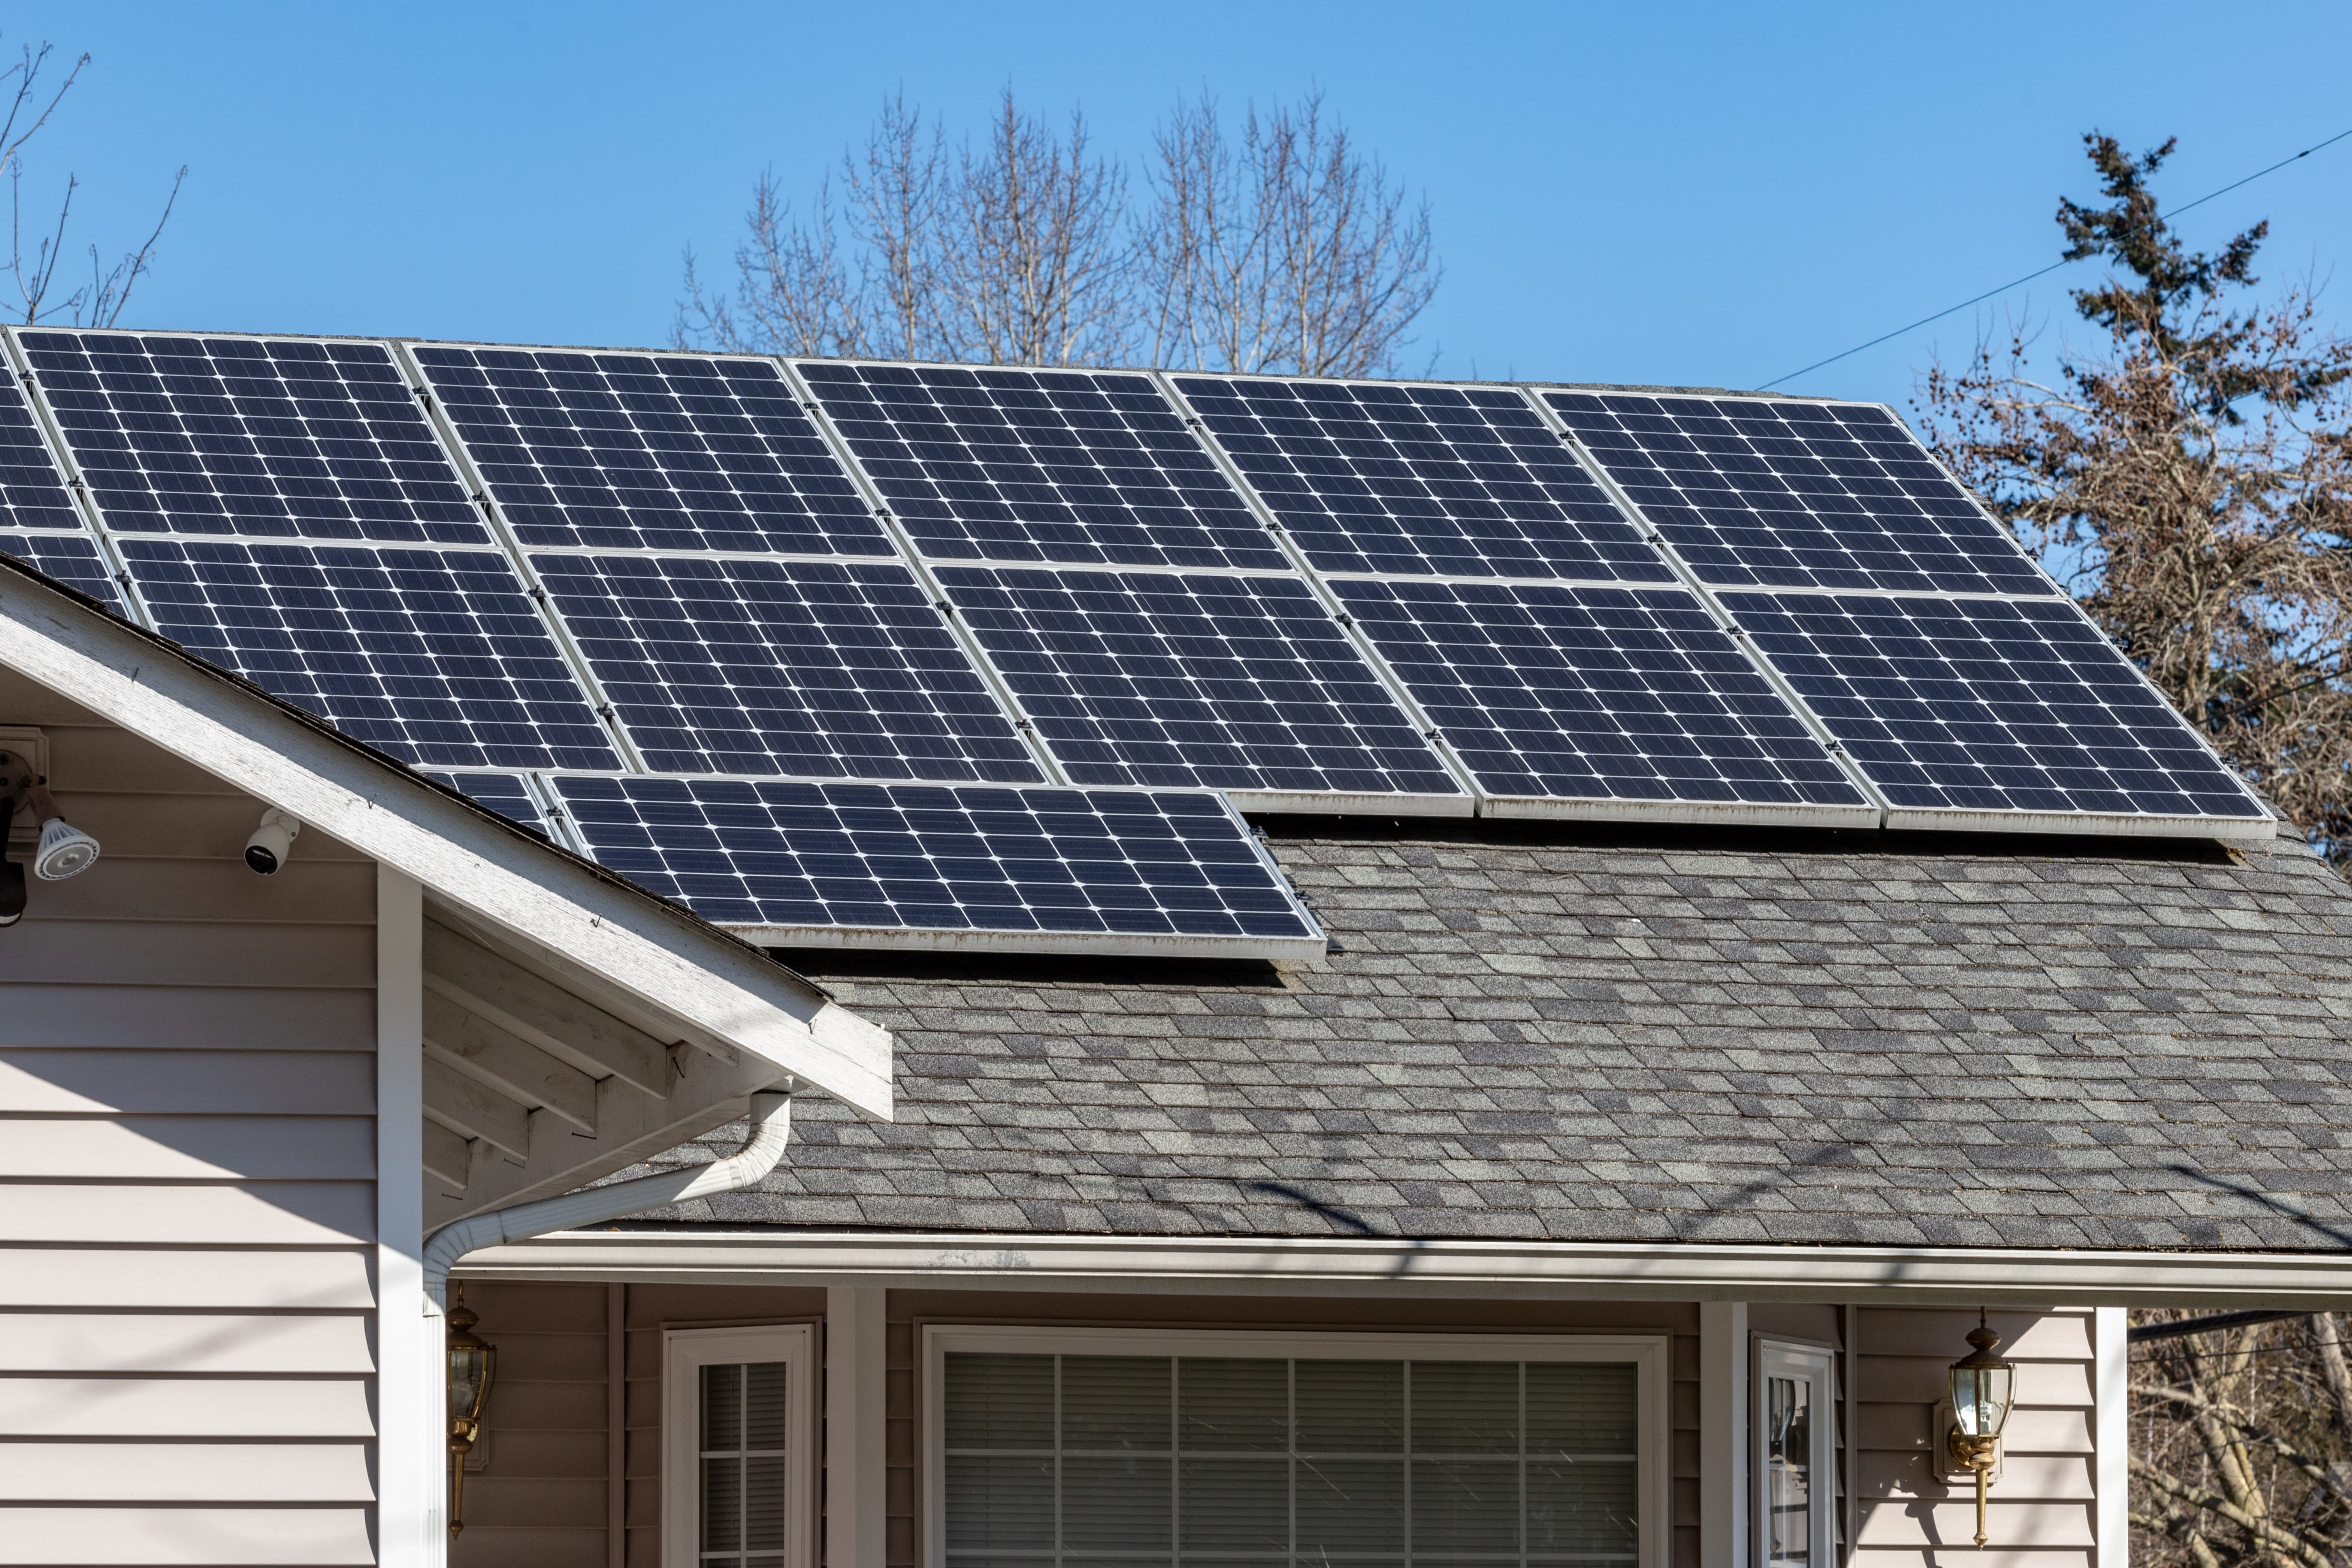 How Does The Federal Solar Tax Credit Work? - Wildgrid Home